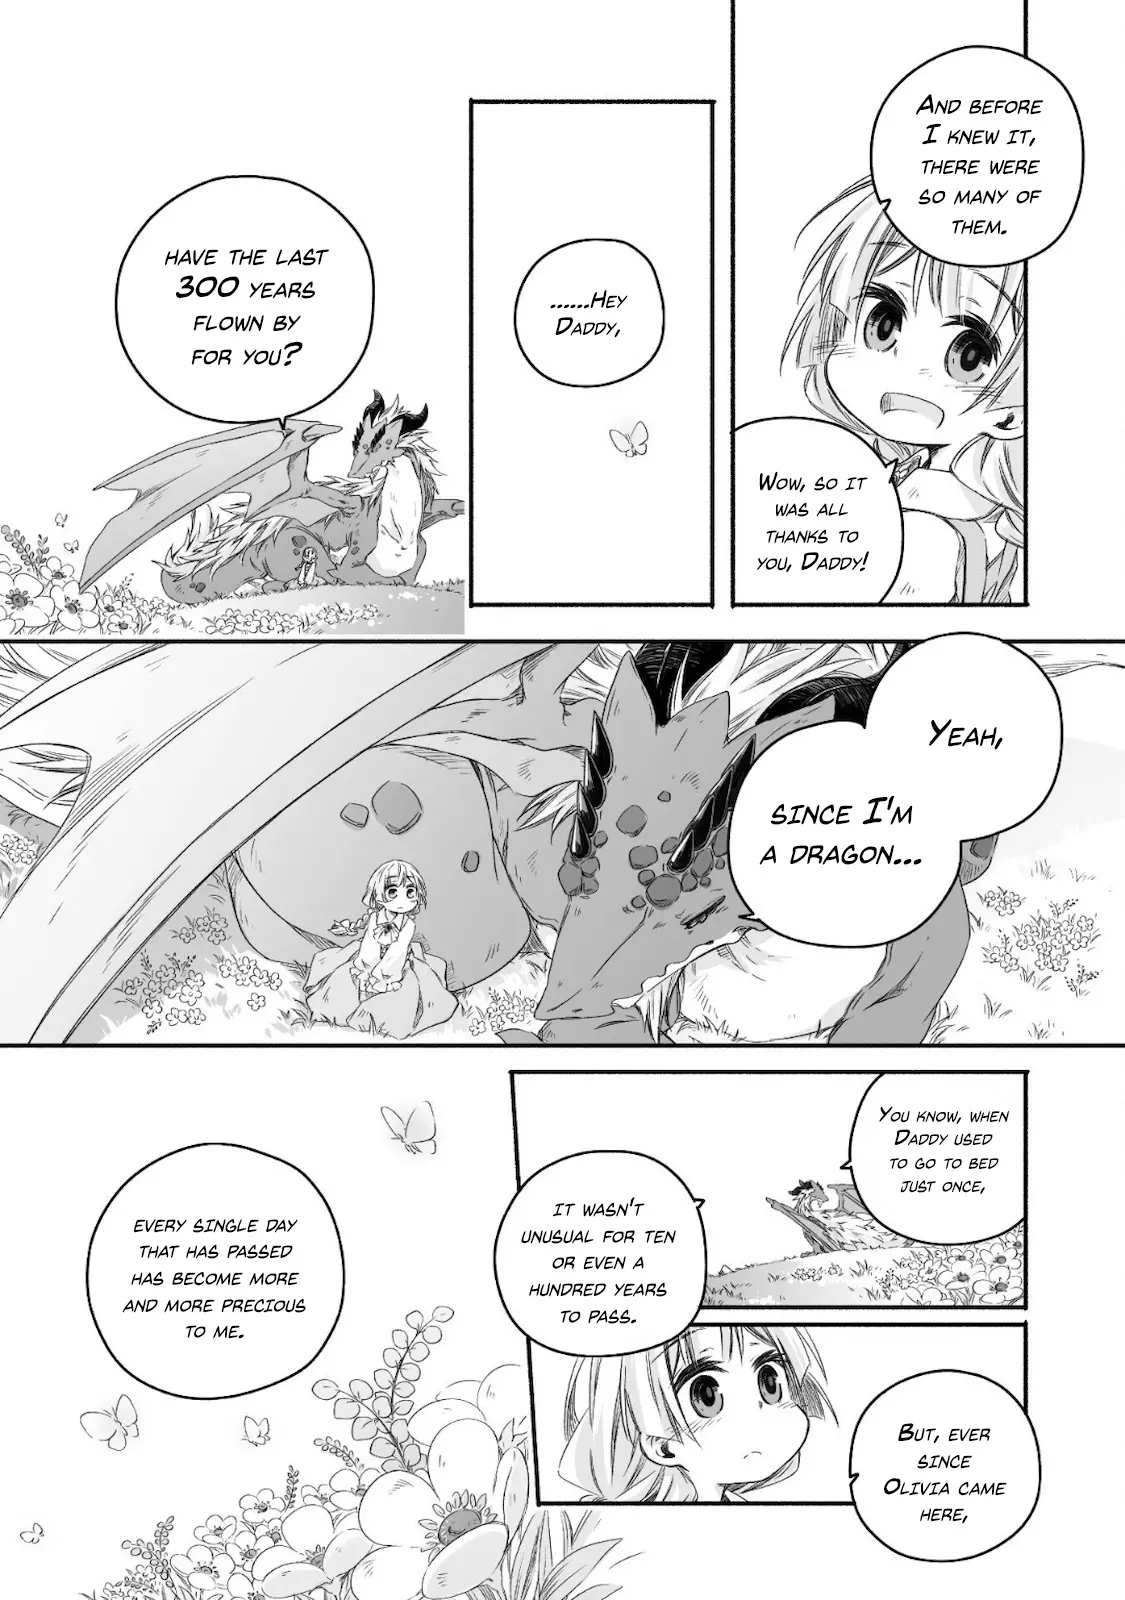 Parenting Diary Of The Strongest Dragon Who Suddenly Became A Dad ～ Cute Daughter, Heartwarming And Growing Up To Be The Strongest In The Human World ～ - 12 page 18-2c91e3ca